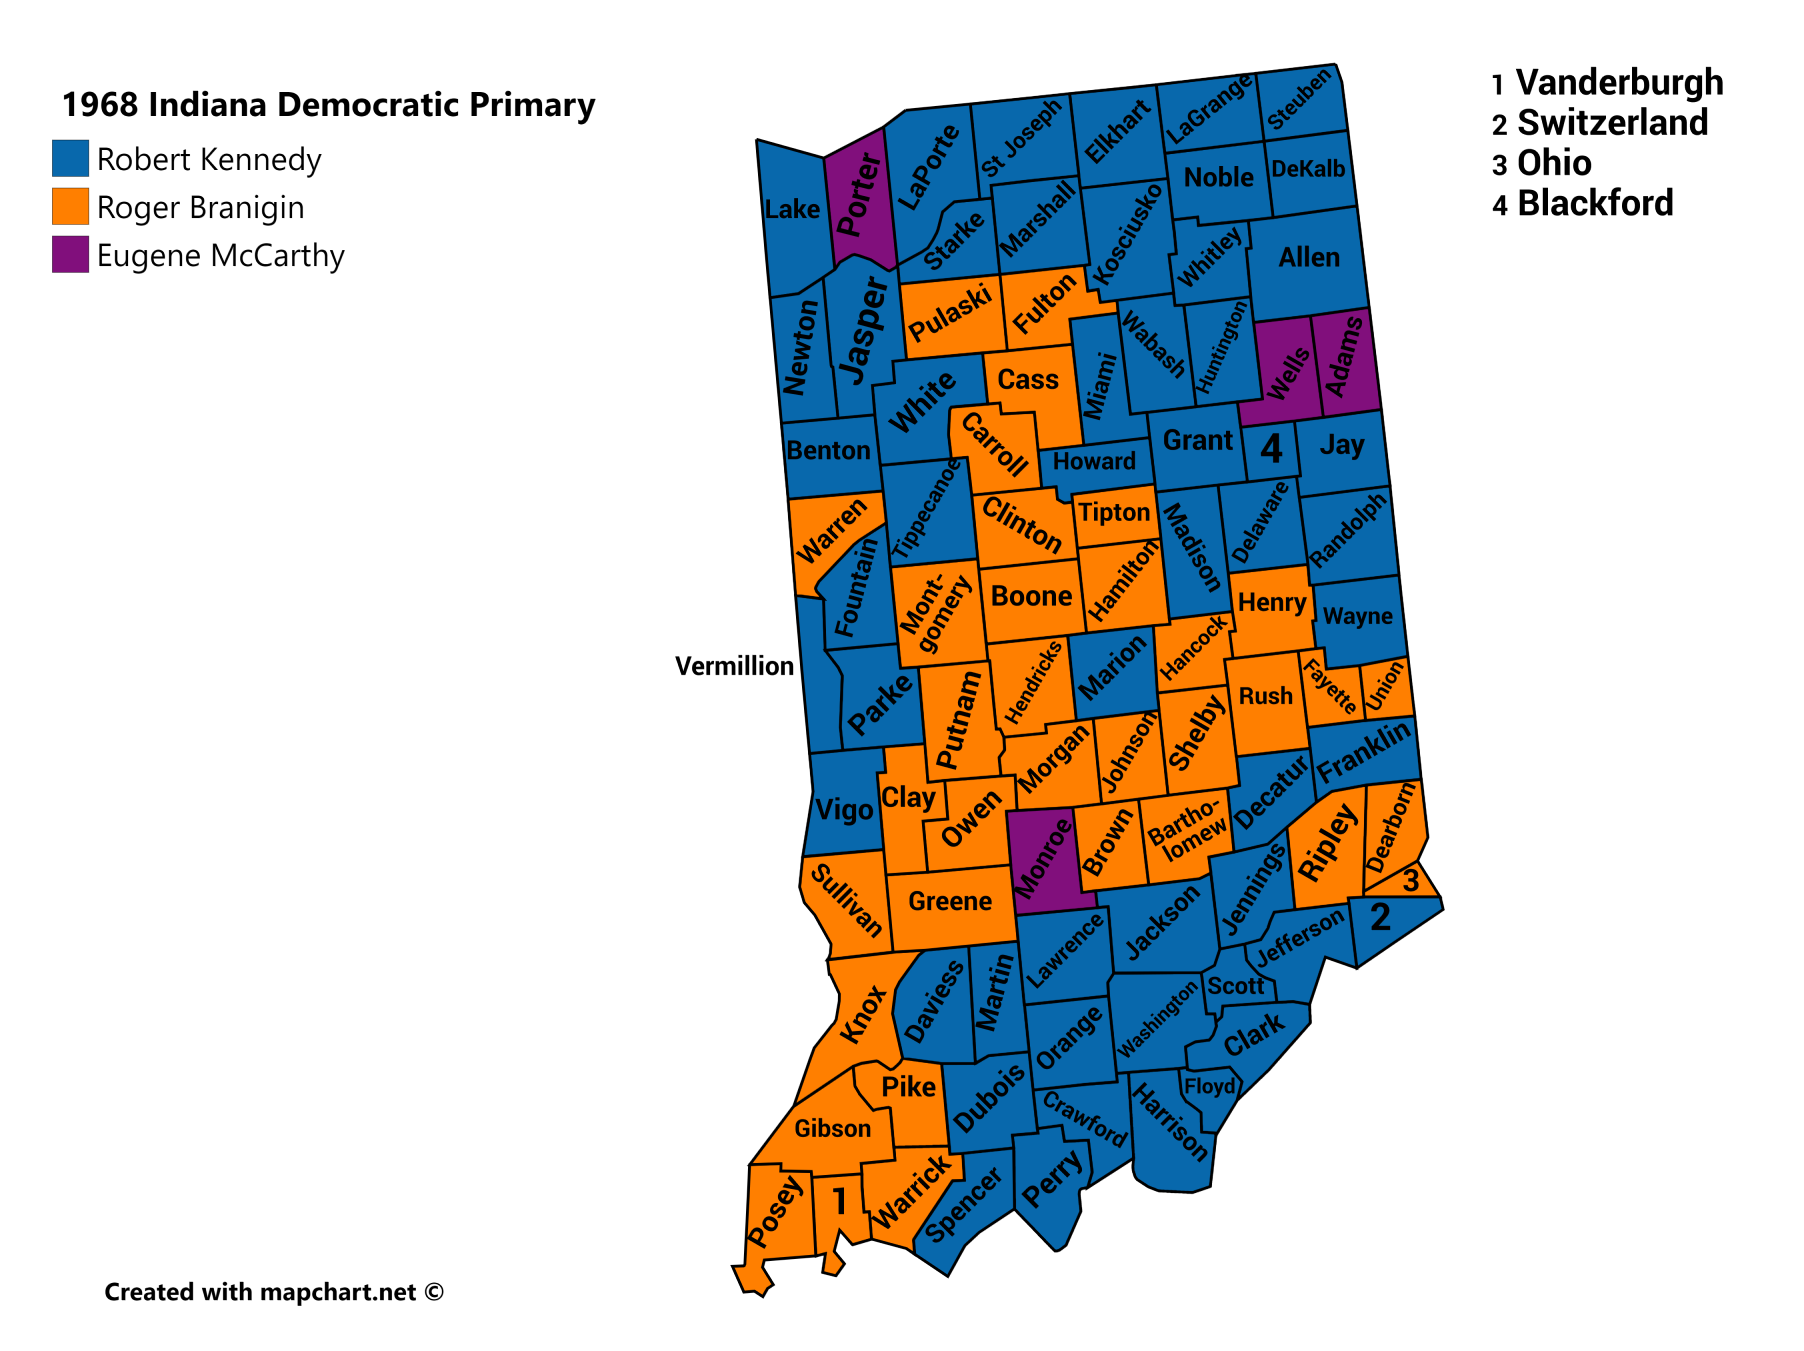 1968 Indiana Democratic Primary cropped.png